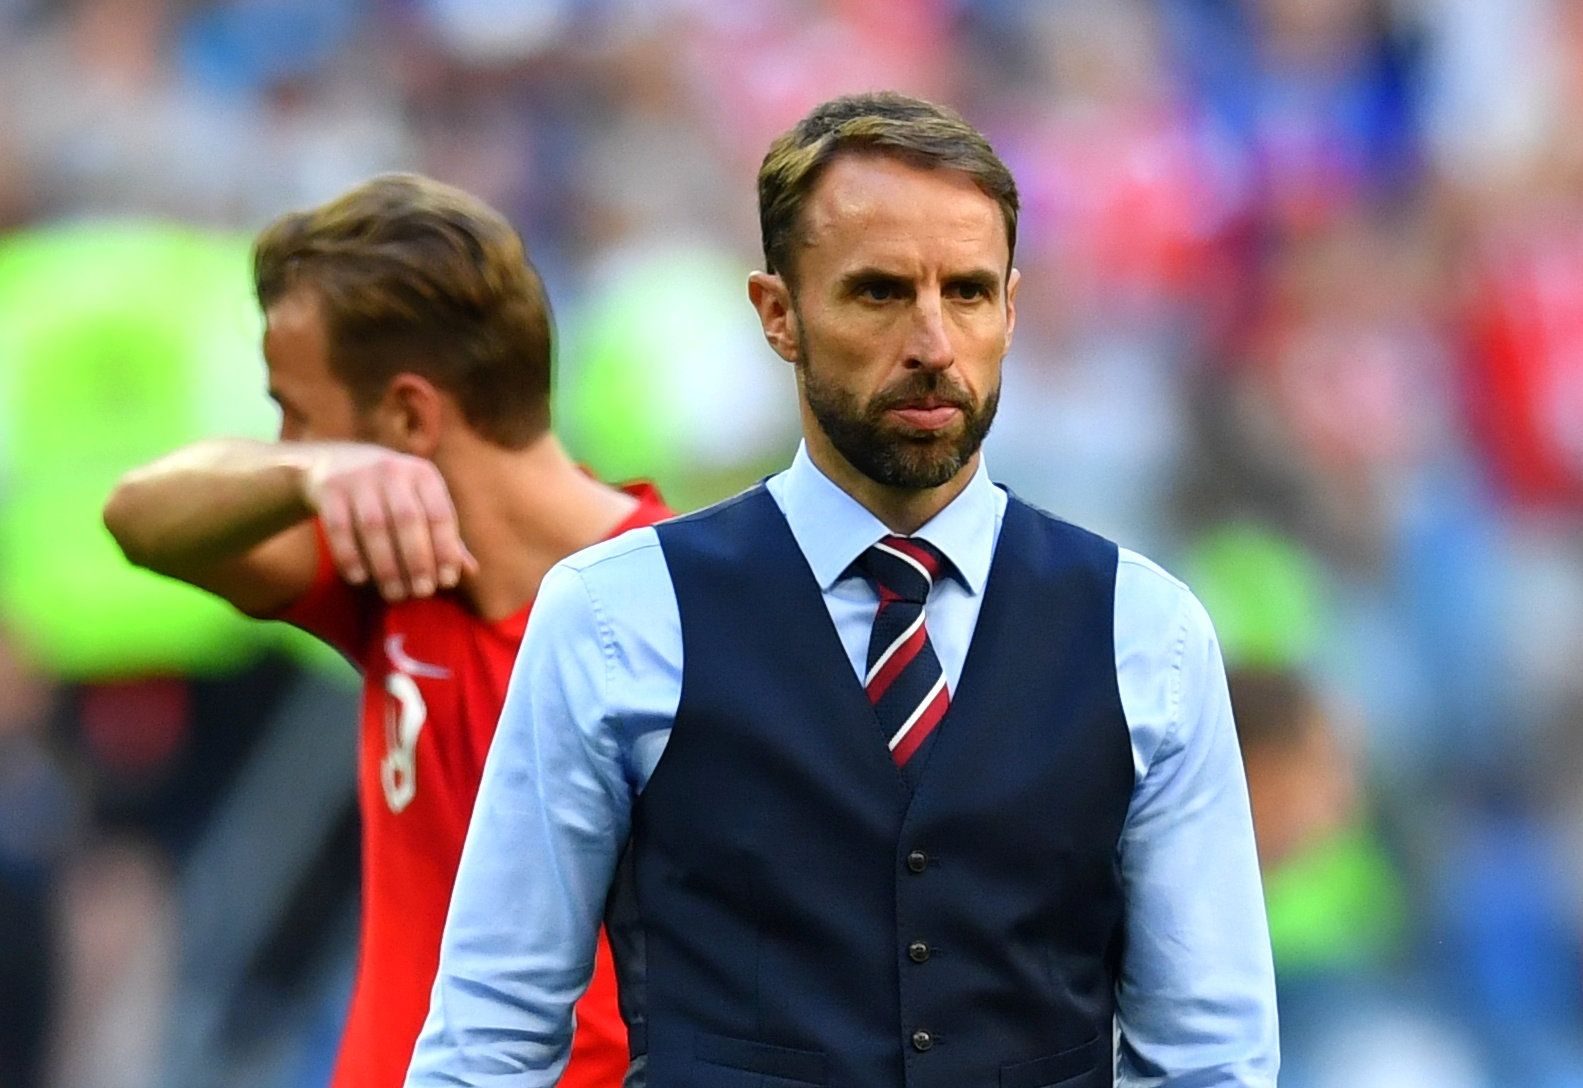 Soccer Football - World Cup - Third Place Play Off - Belgium v England - Saint Petersburg Stadium, Saint Petersburg, Russia - July 14, 2018  England manager Gareth Southgate at the end of the match   REUTERS/Dylan Martinez